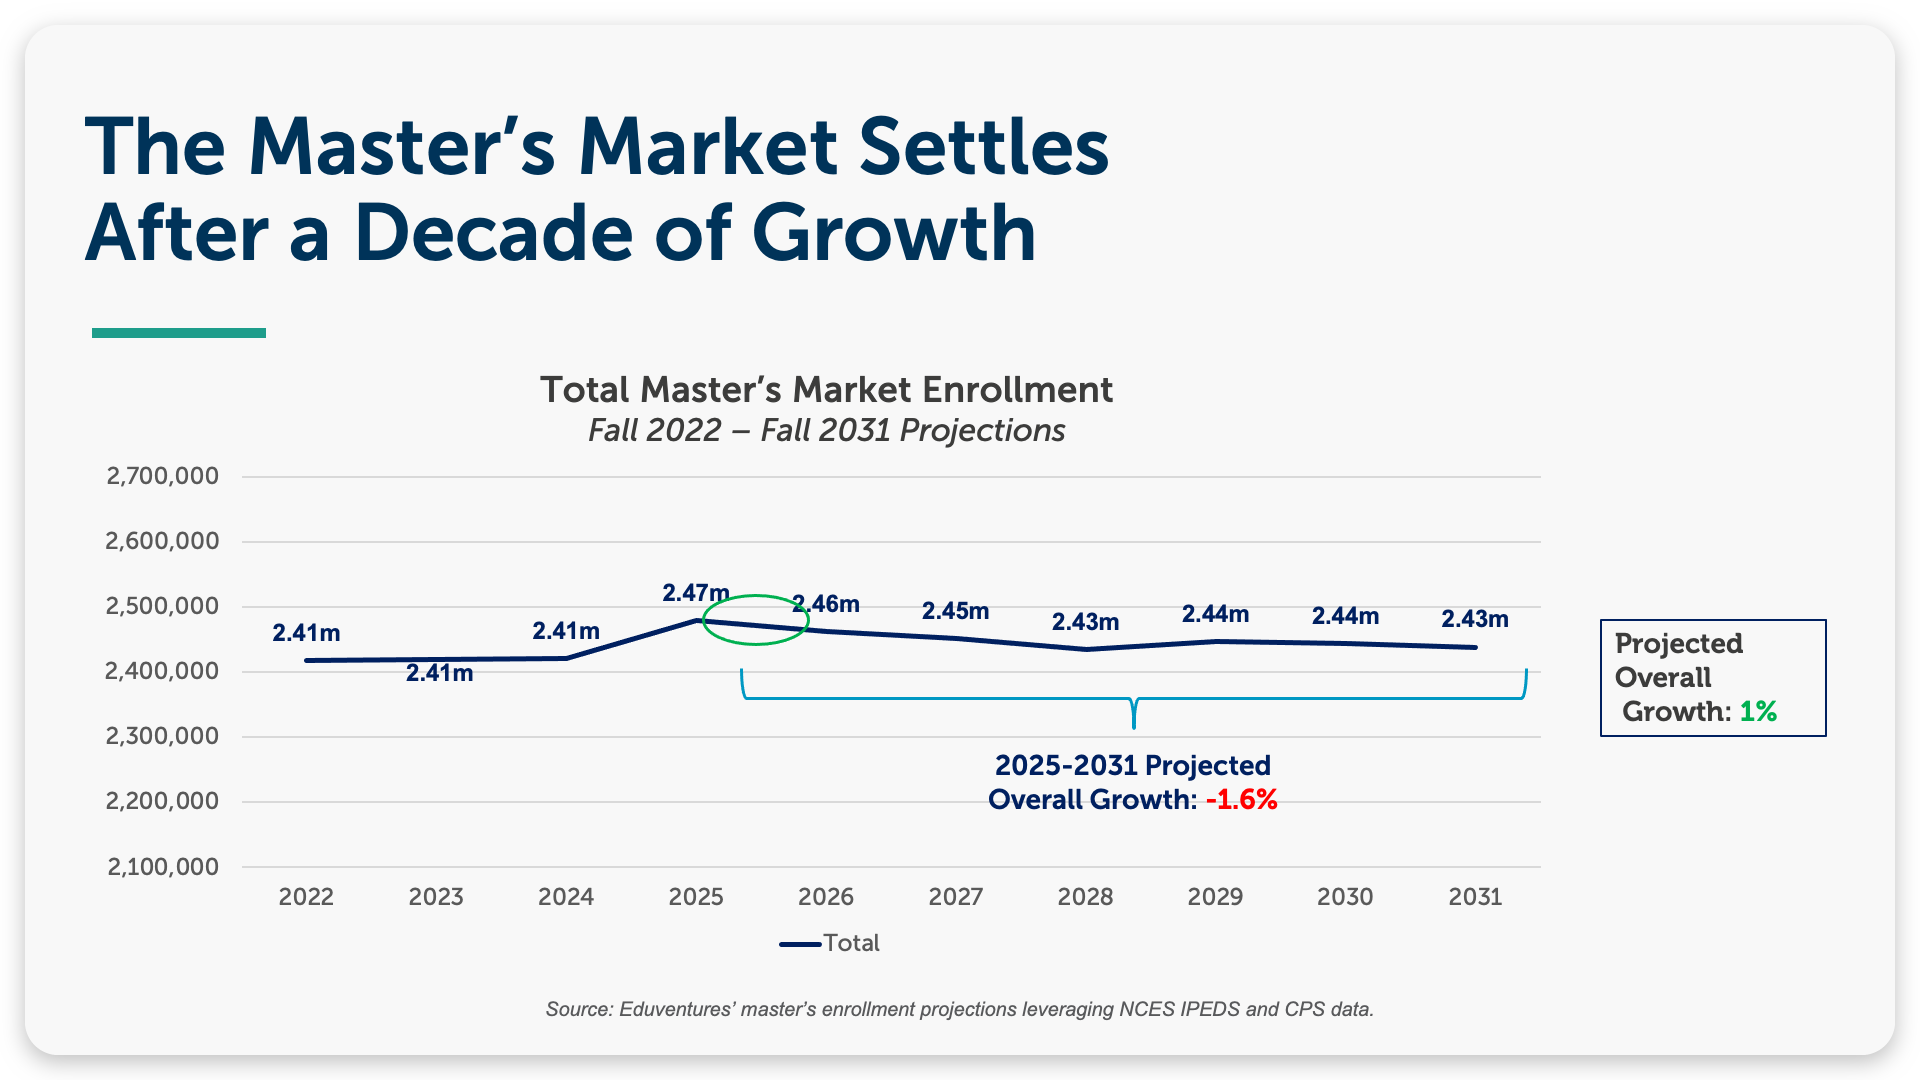 The Master's Market Settles After a Decade of Growth